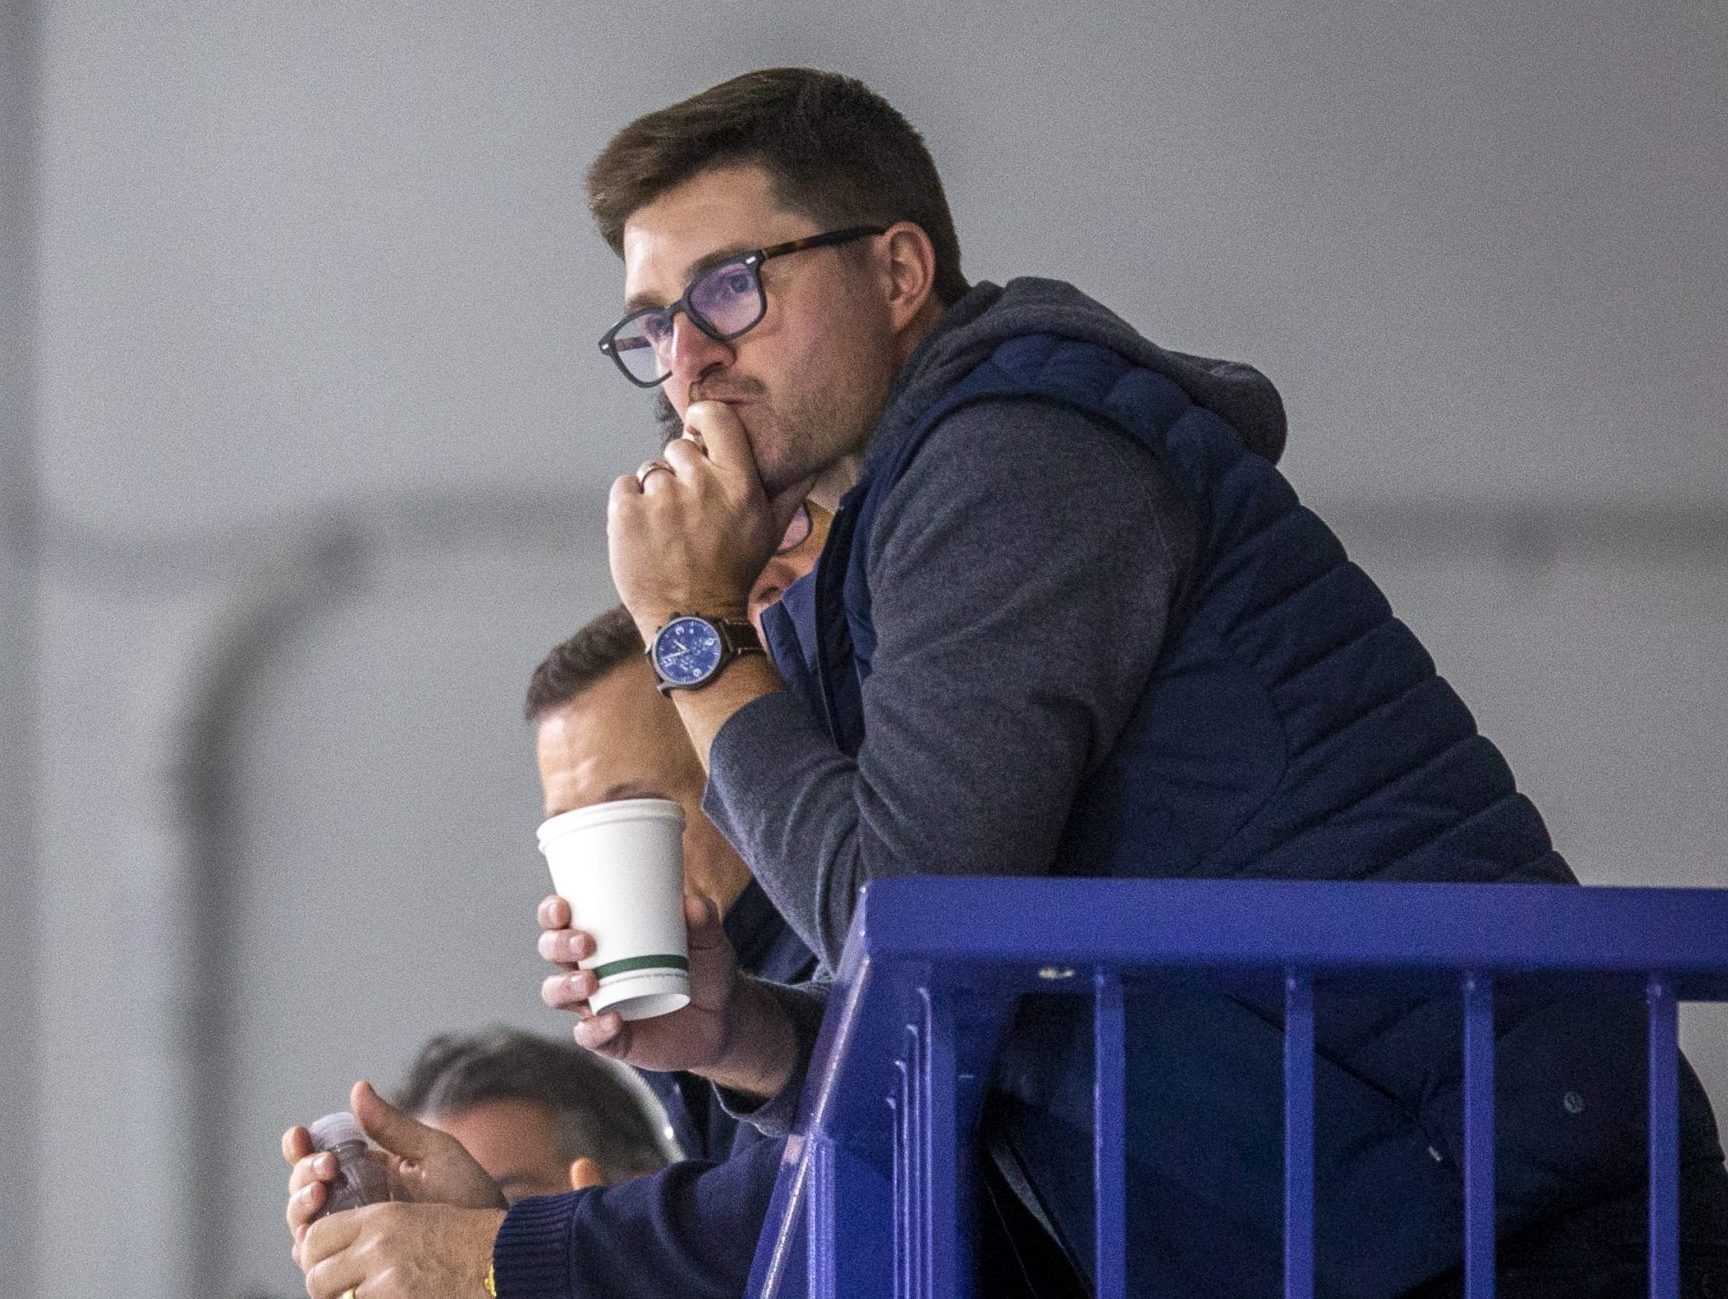 Kyle Dubas changed the Leafs, but not their playoff history